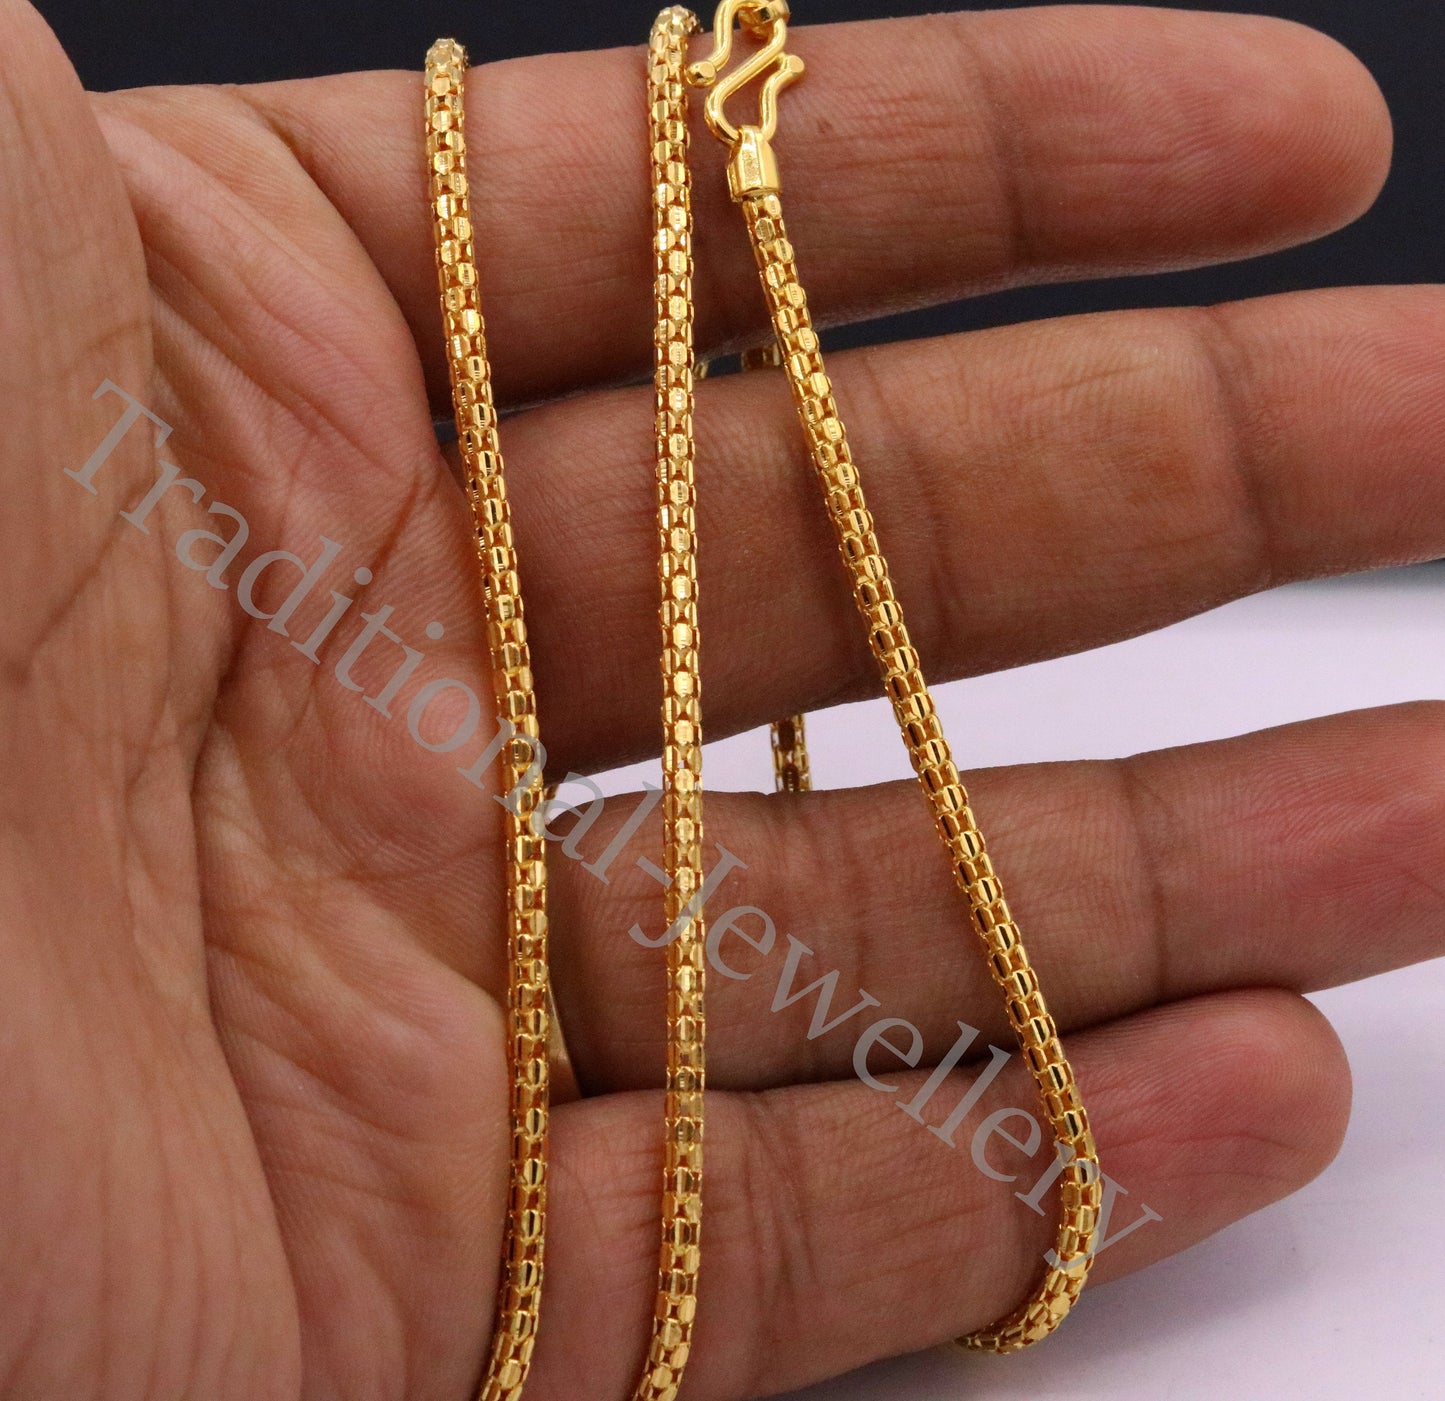 22karat yellow gold handmade unique design chain 20 inches unisex chain necklace from Rajasthan India indian gold jewelry - TRIBAL ORNAMENTS